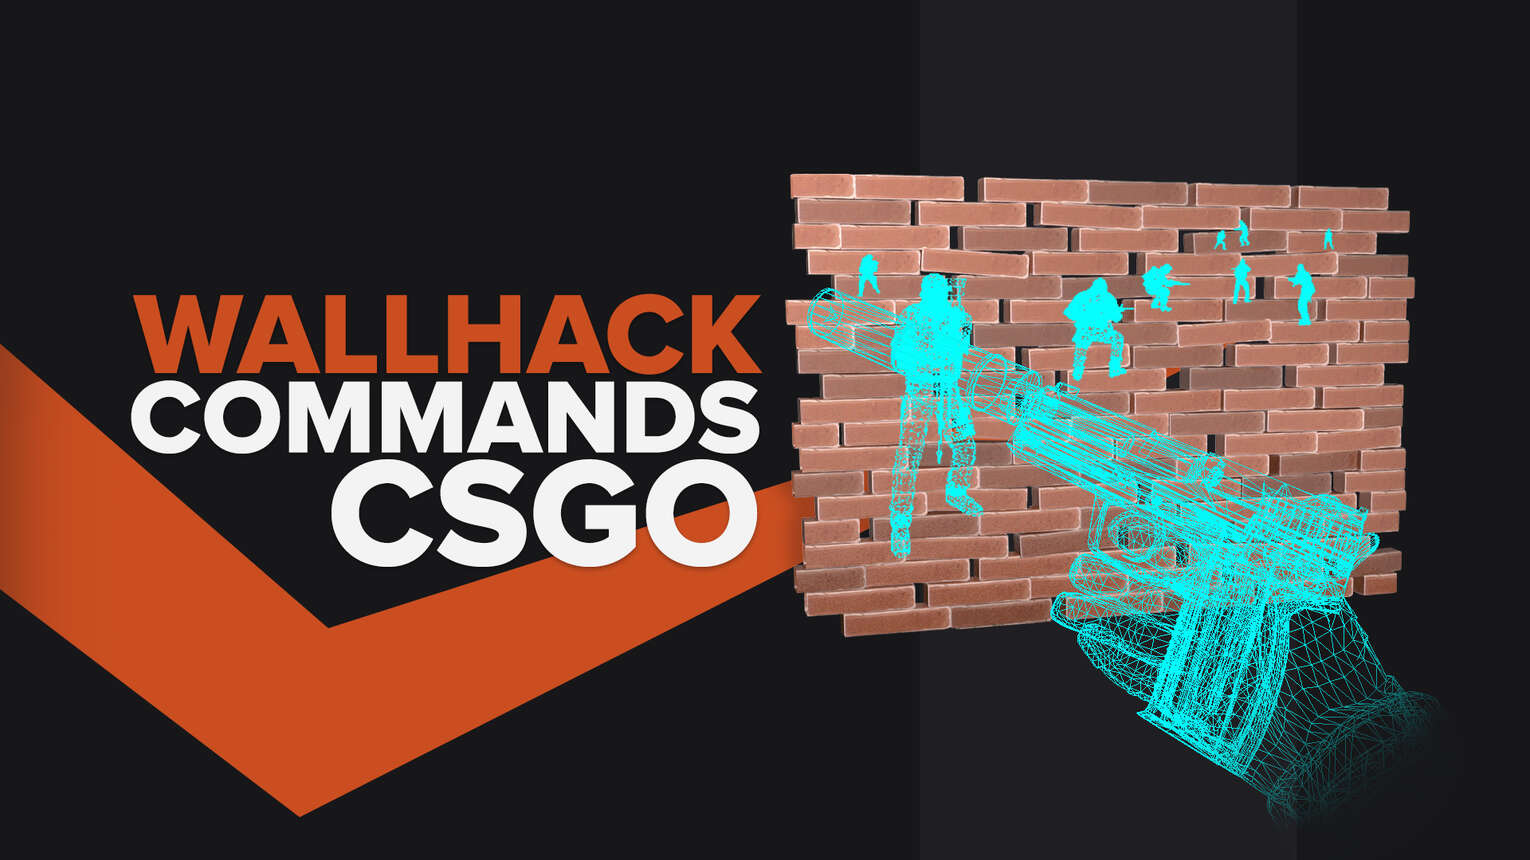 Steam Community :: Guide :: How to Hack in CS GO 2.0